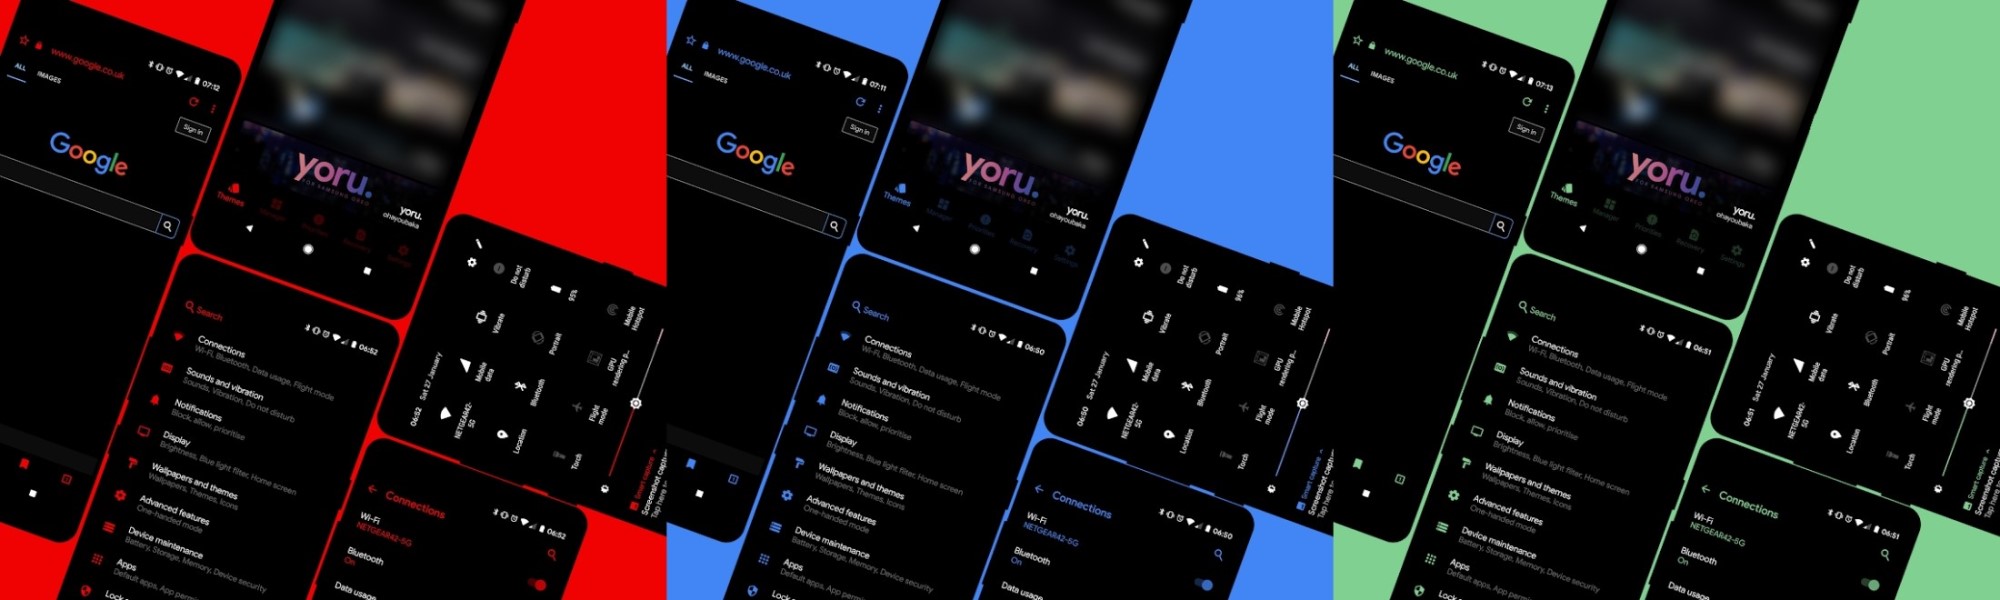 8 Best Substratum Themes for Samsung Yoru